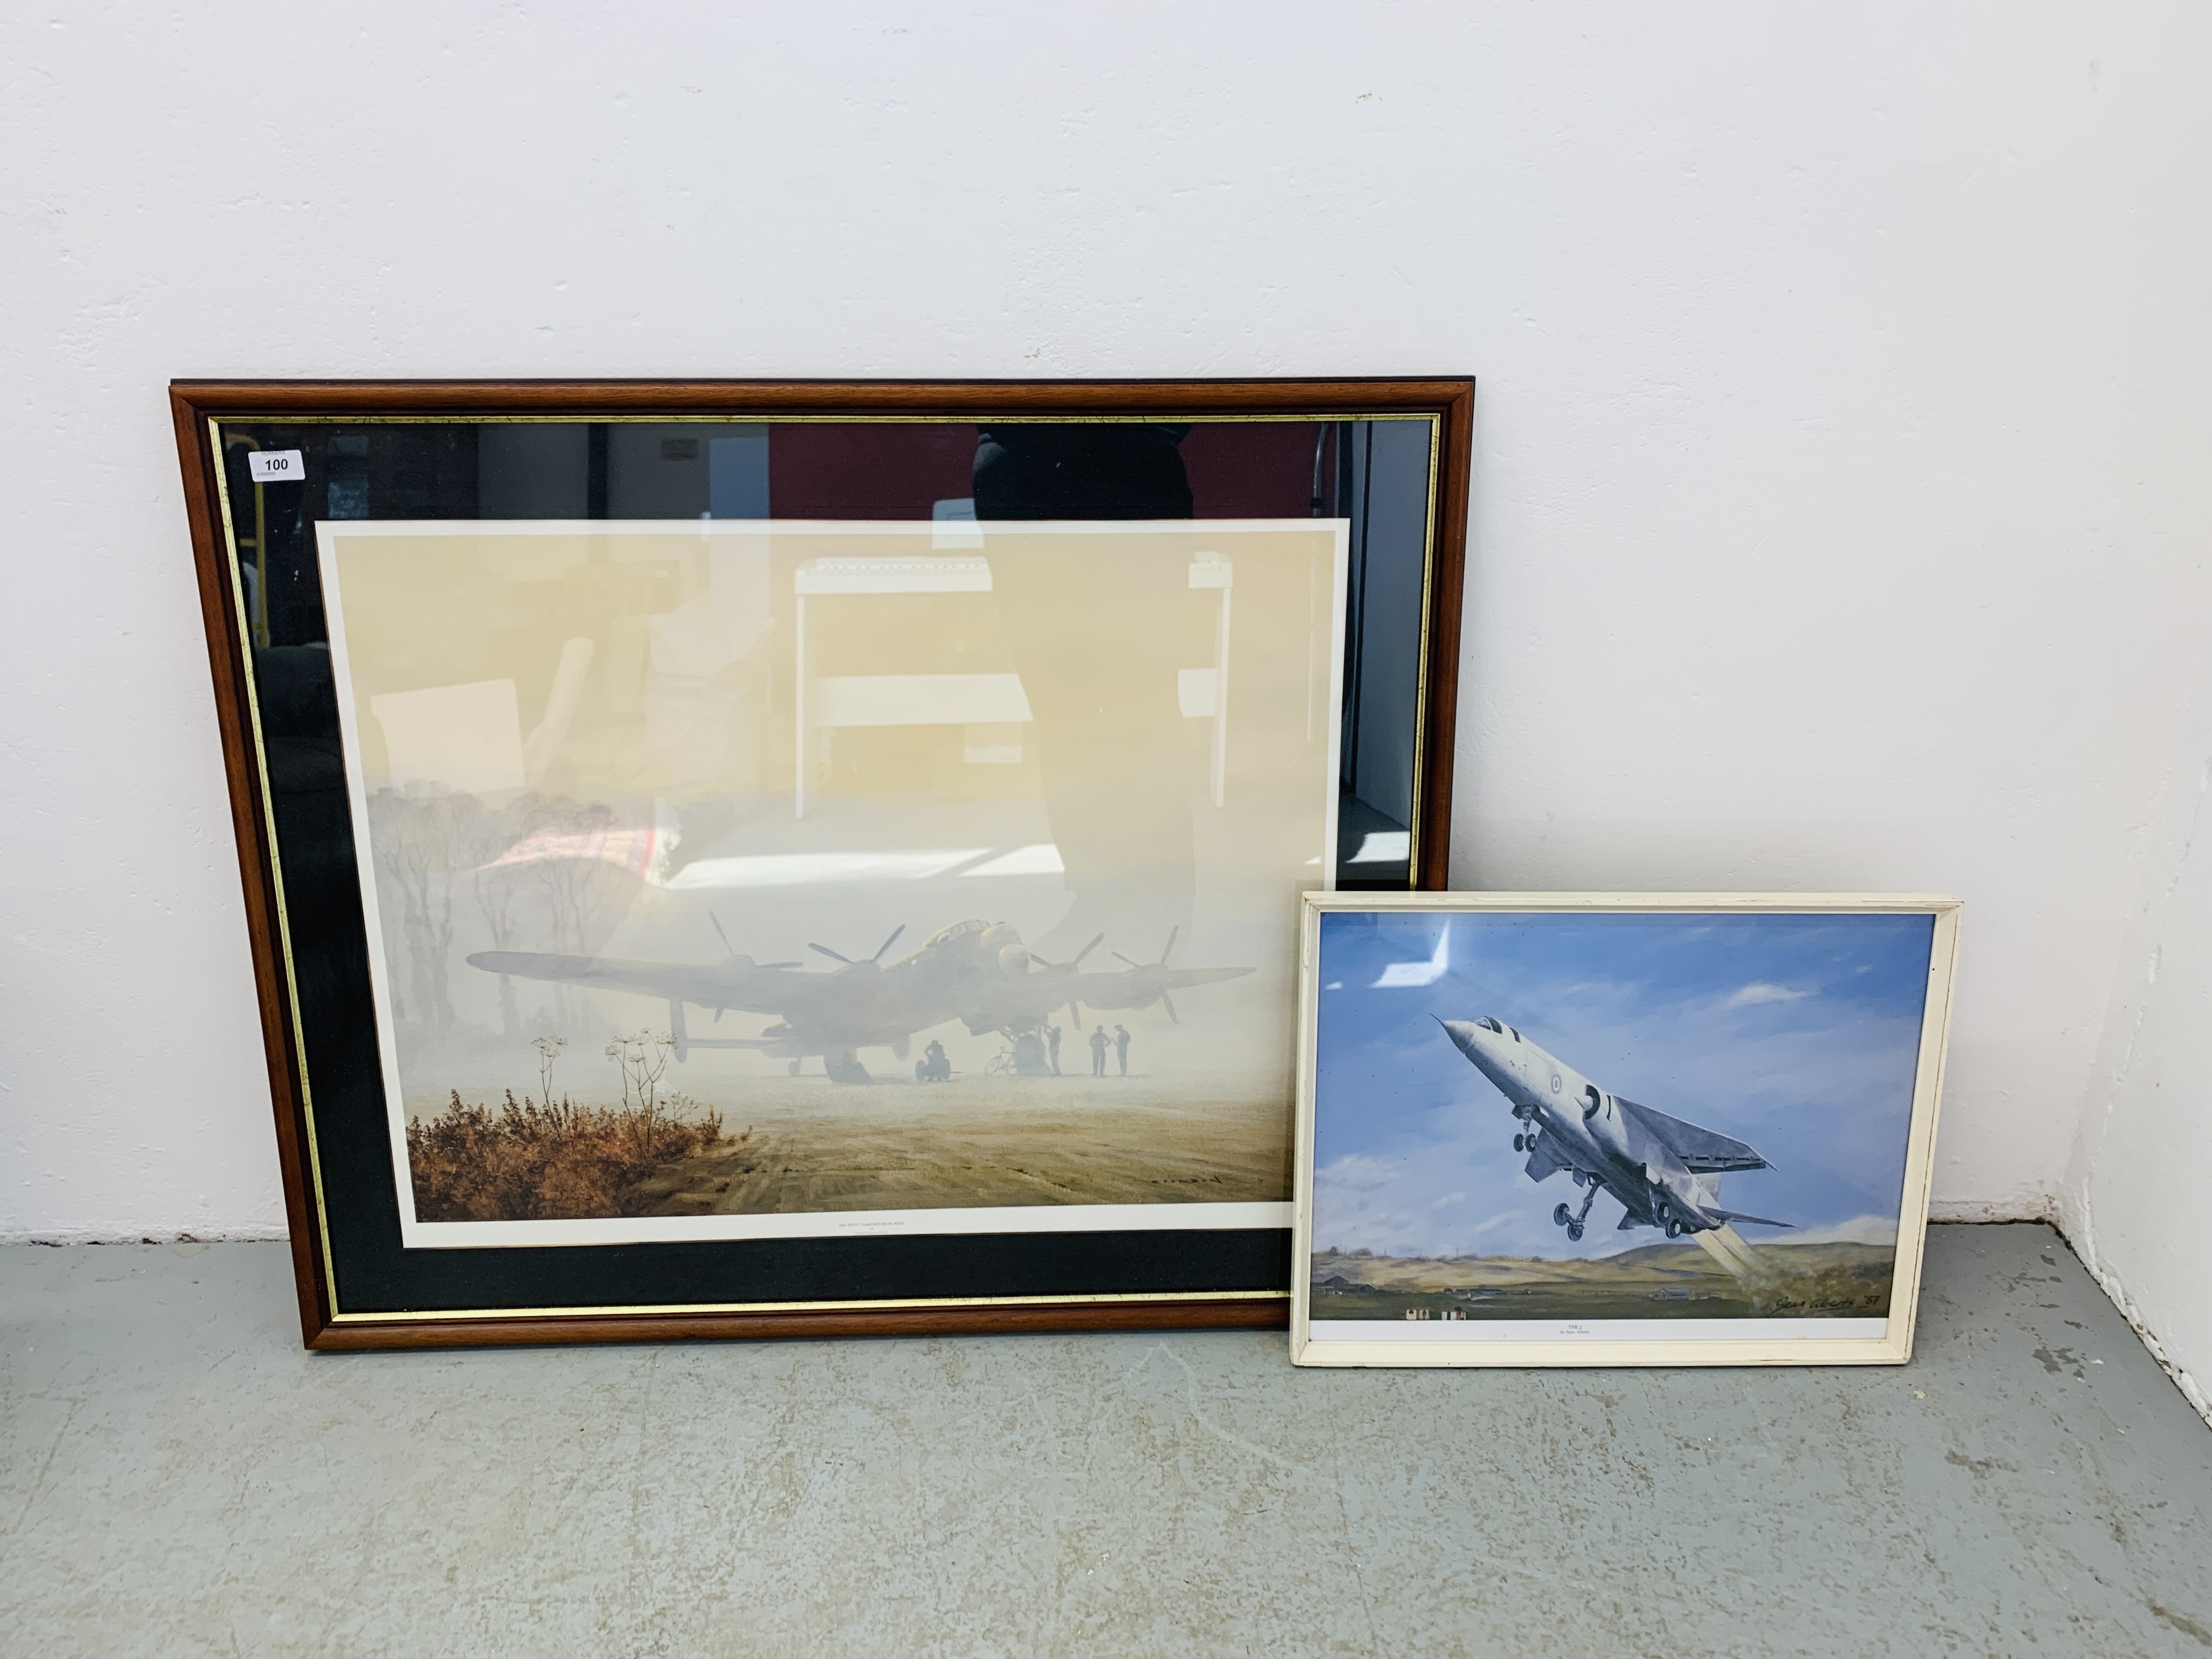 FRAMED "OFF DUTY LANCASTER AT REST" PRINT ALONG WITH A FRAMED "TSR2" PRINT BY SEAN ALBERTS.